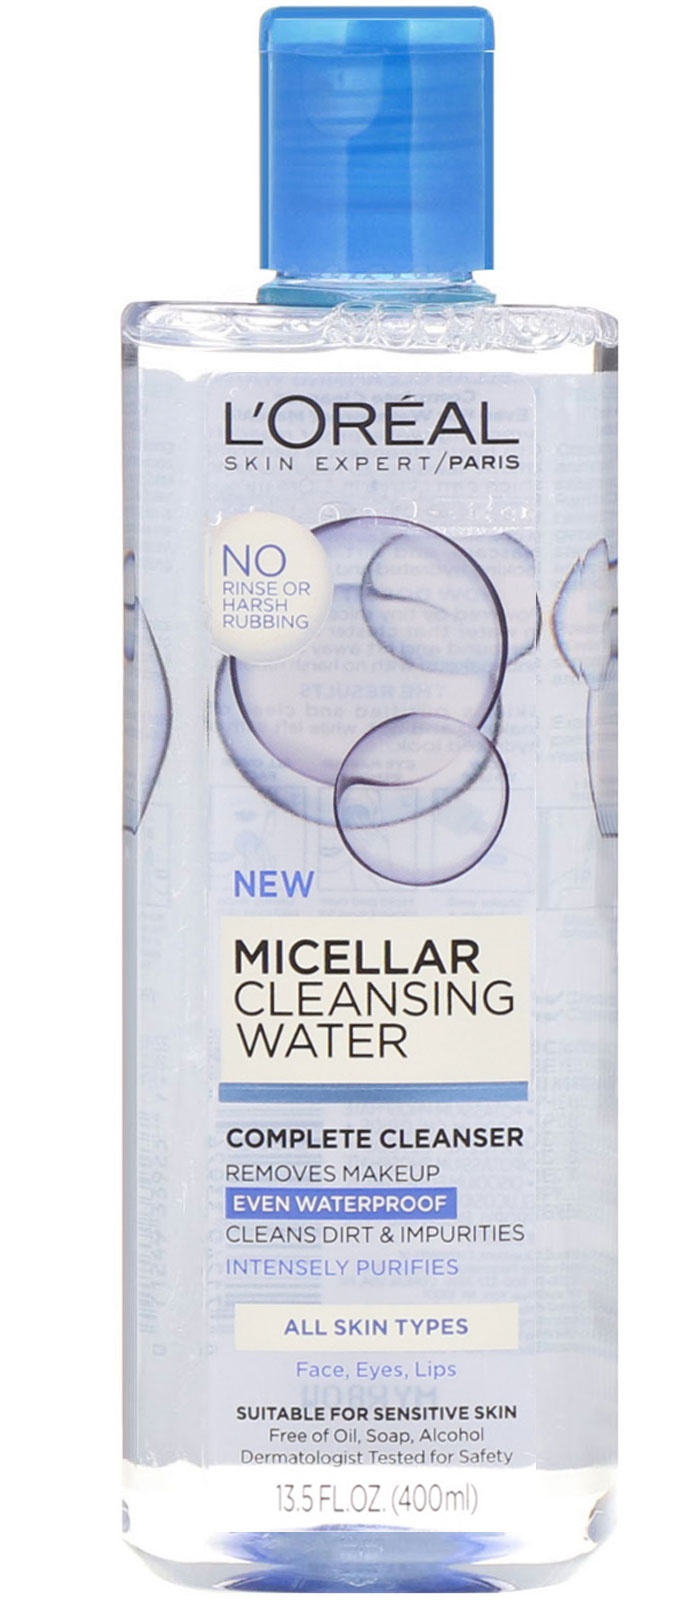 L'Oreal Micellar Cleansing Water Complete Cleanser Waterproof - All Skin Types